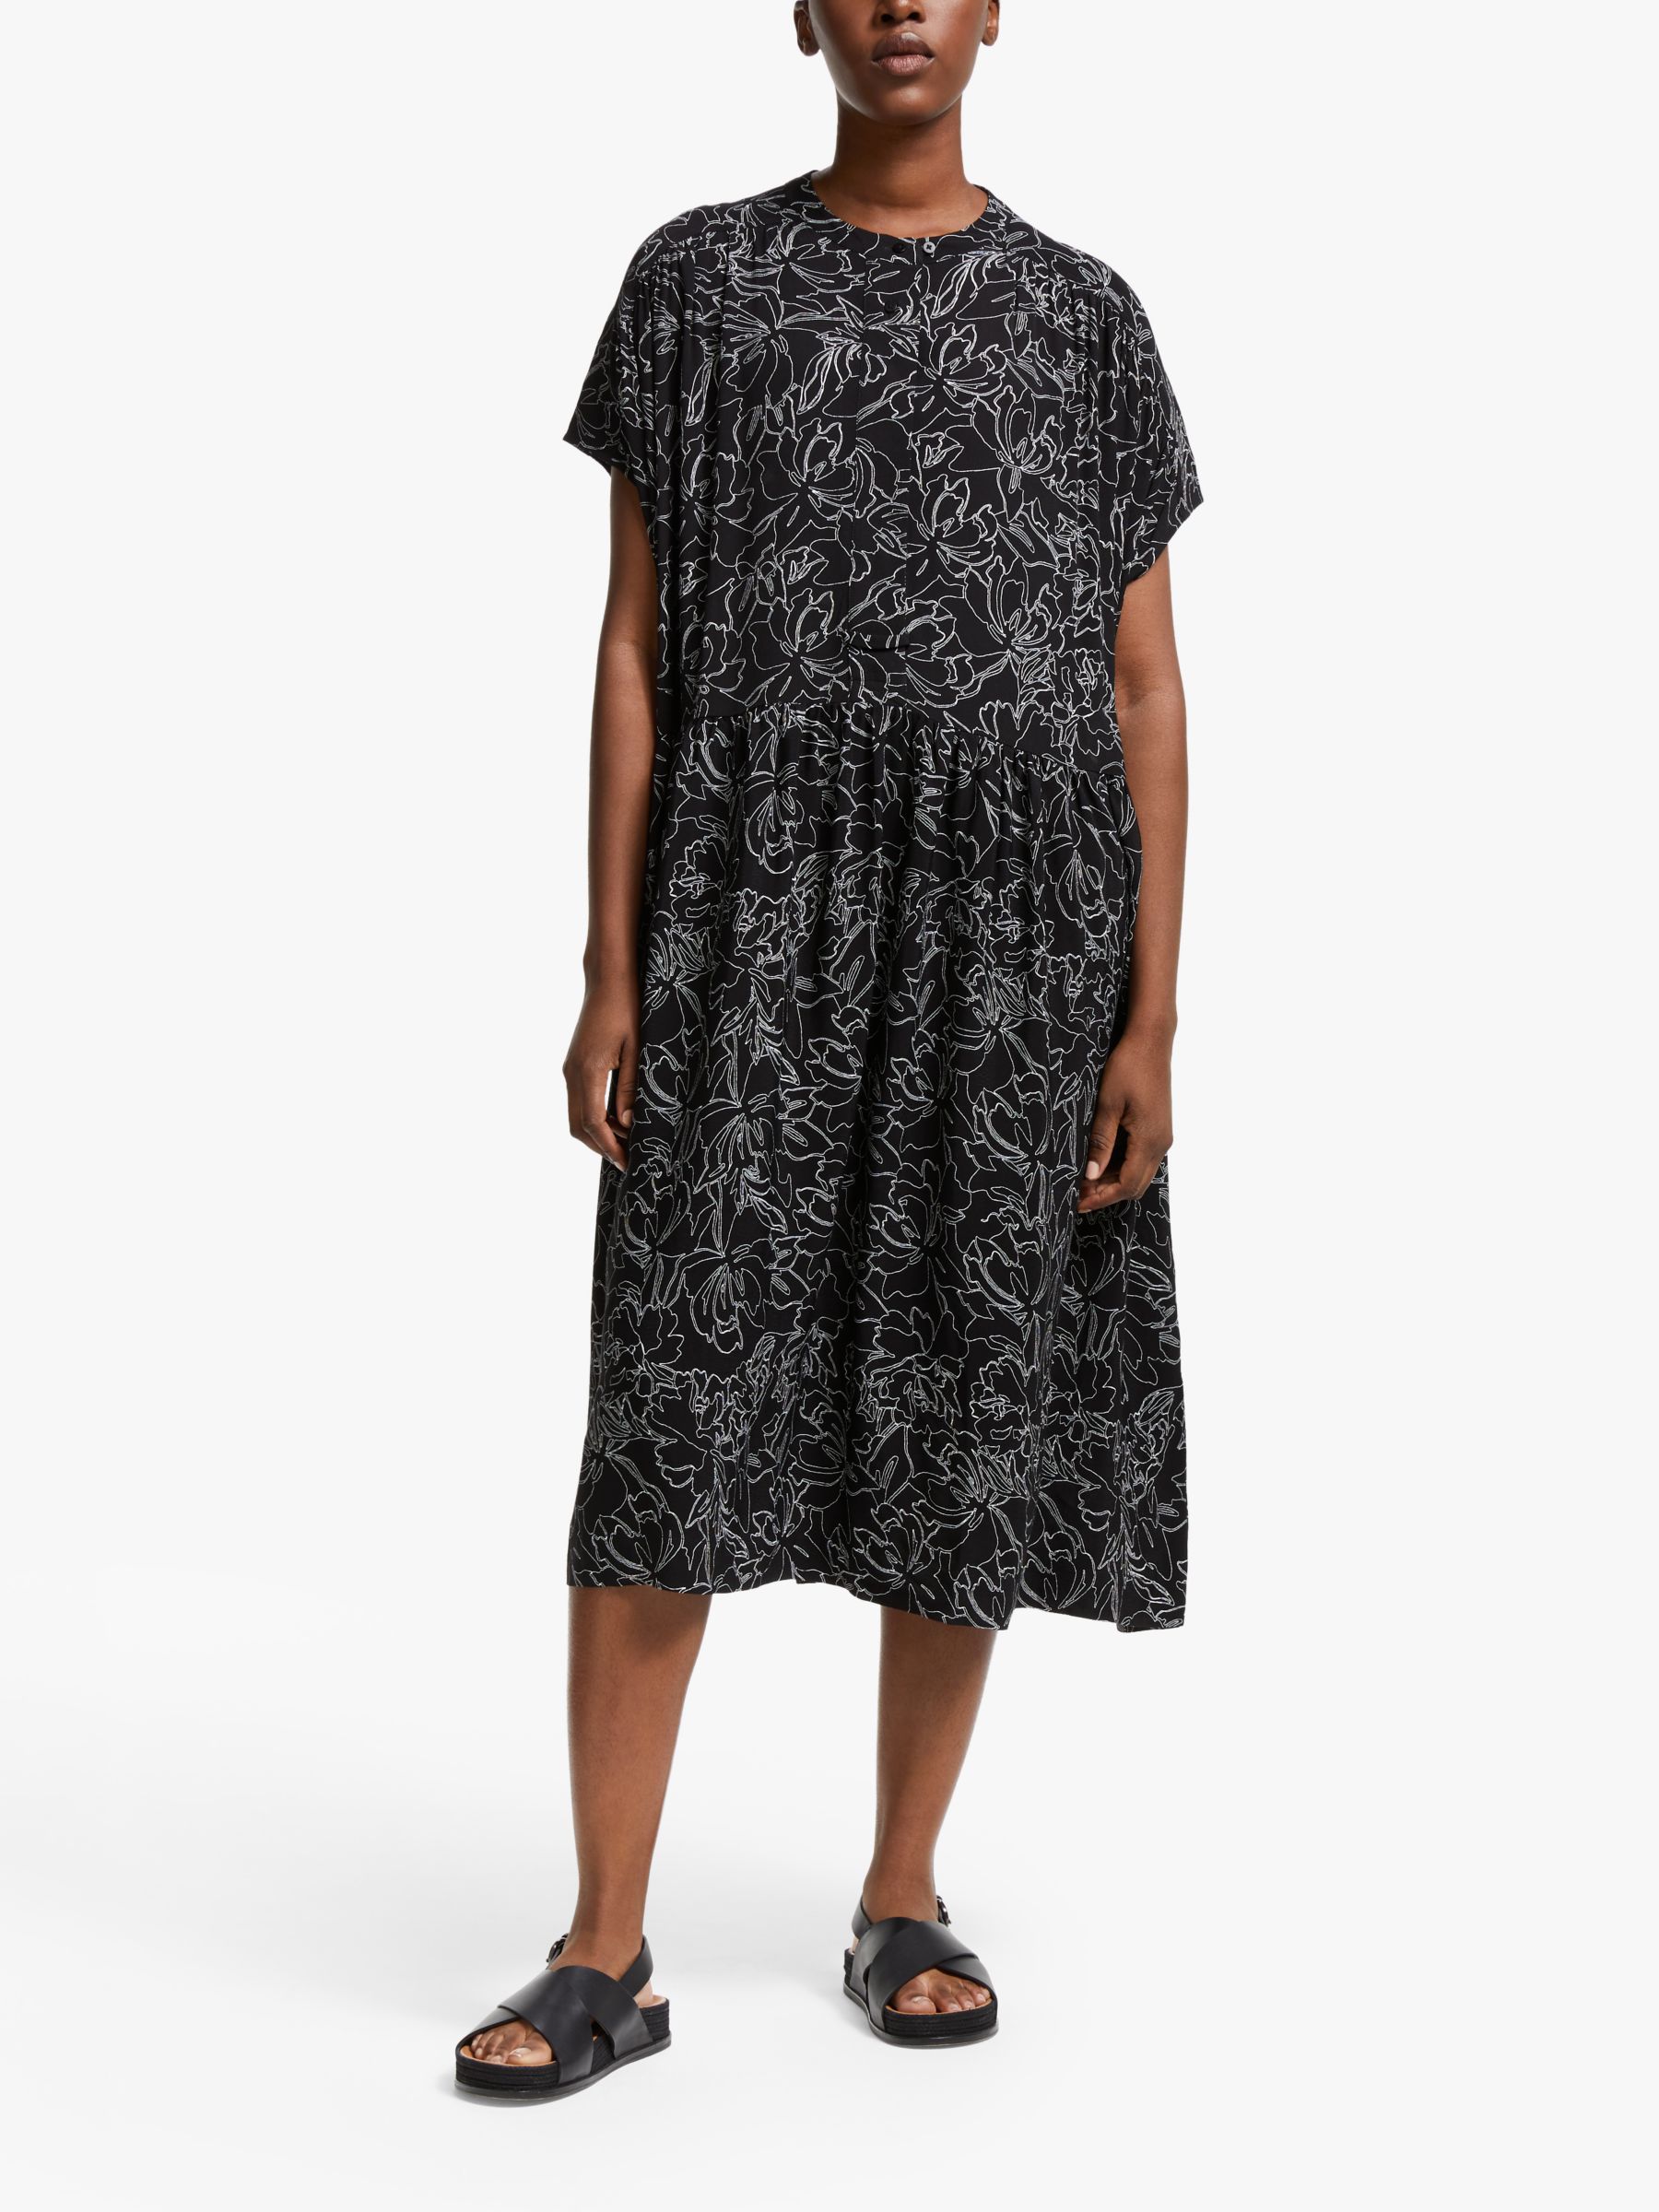 Kin Traced Floral Dress at John Lewis & Partners